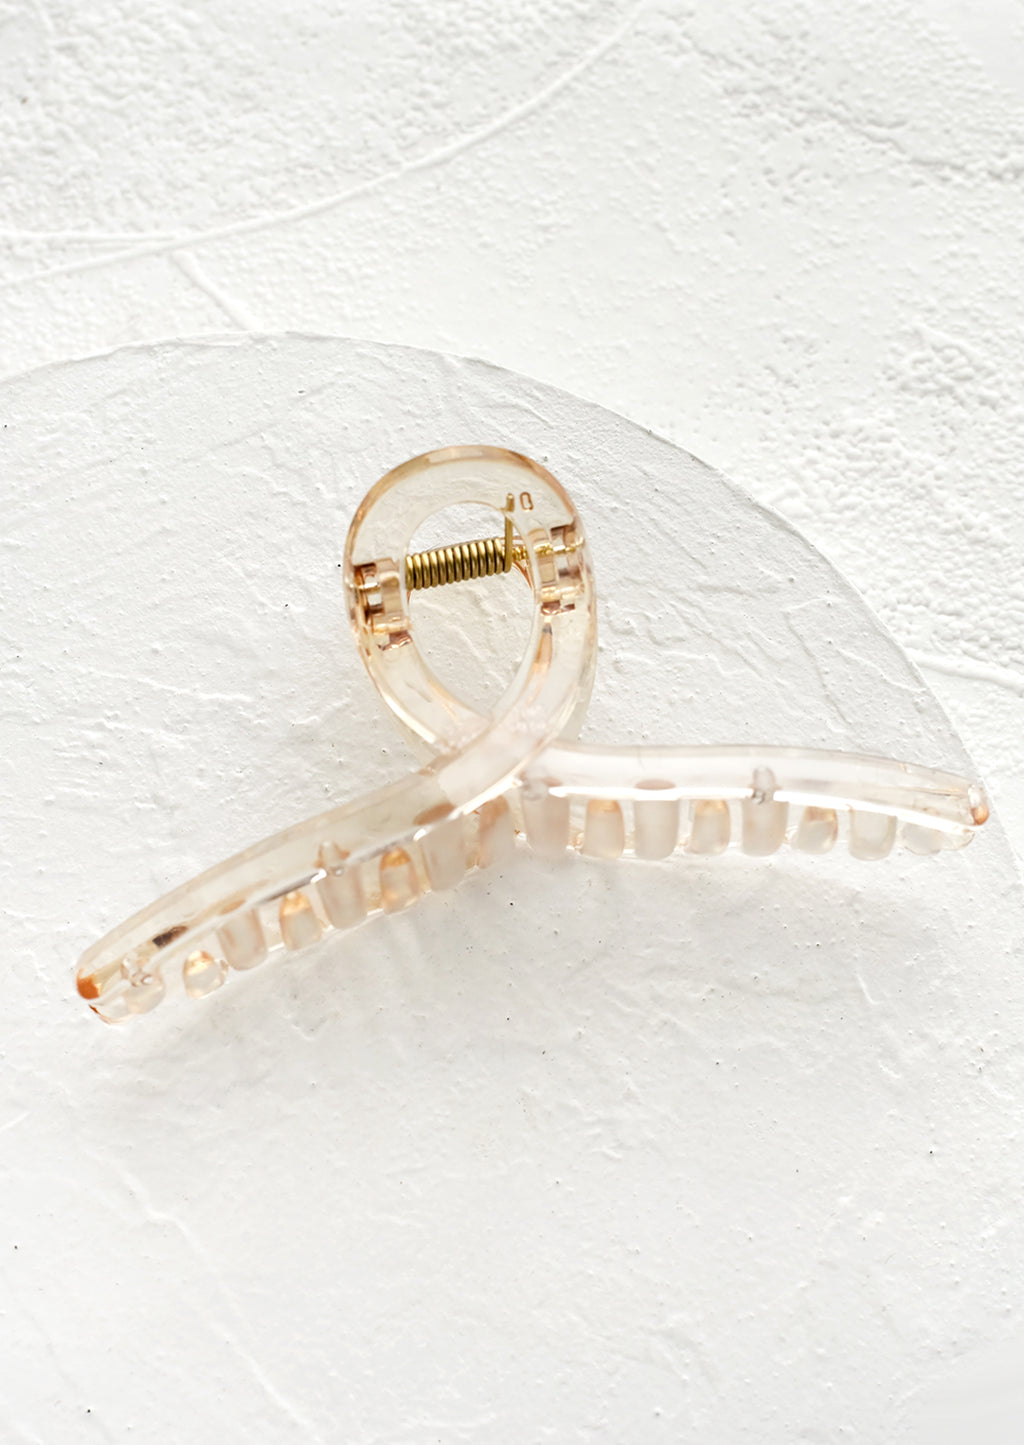 Pale Honey: A french twist acrylic hair clip in pale honey.